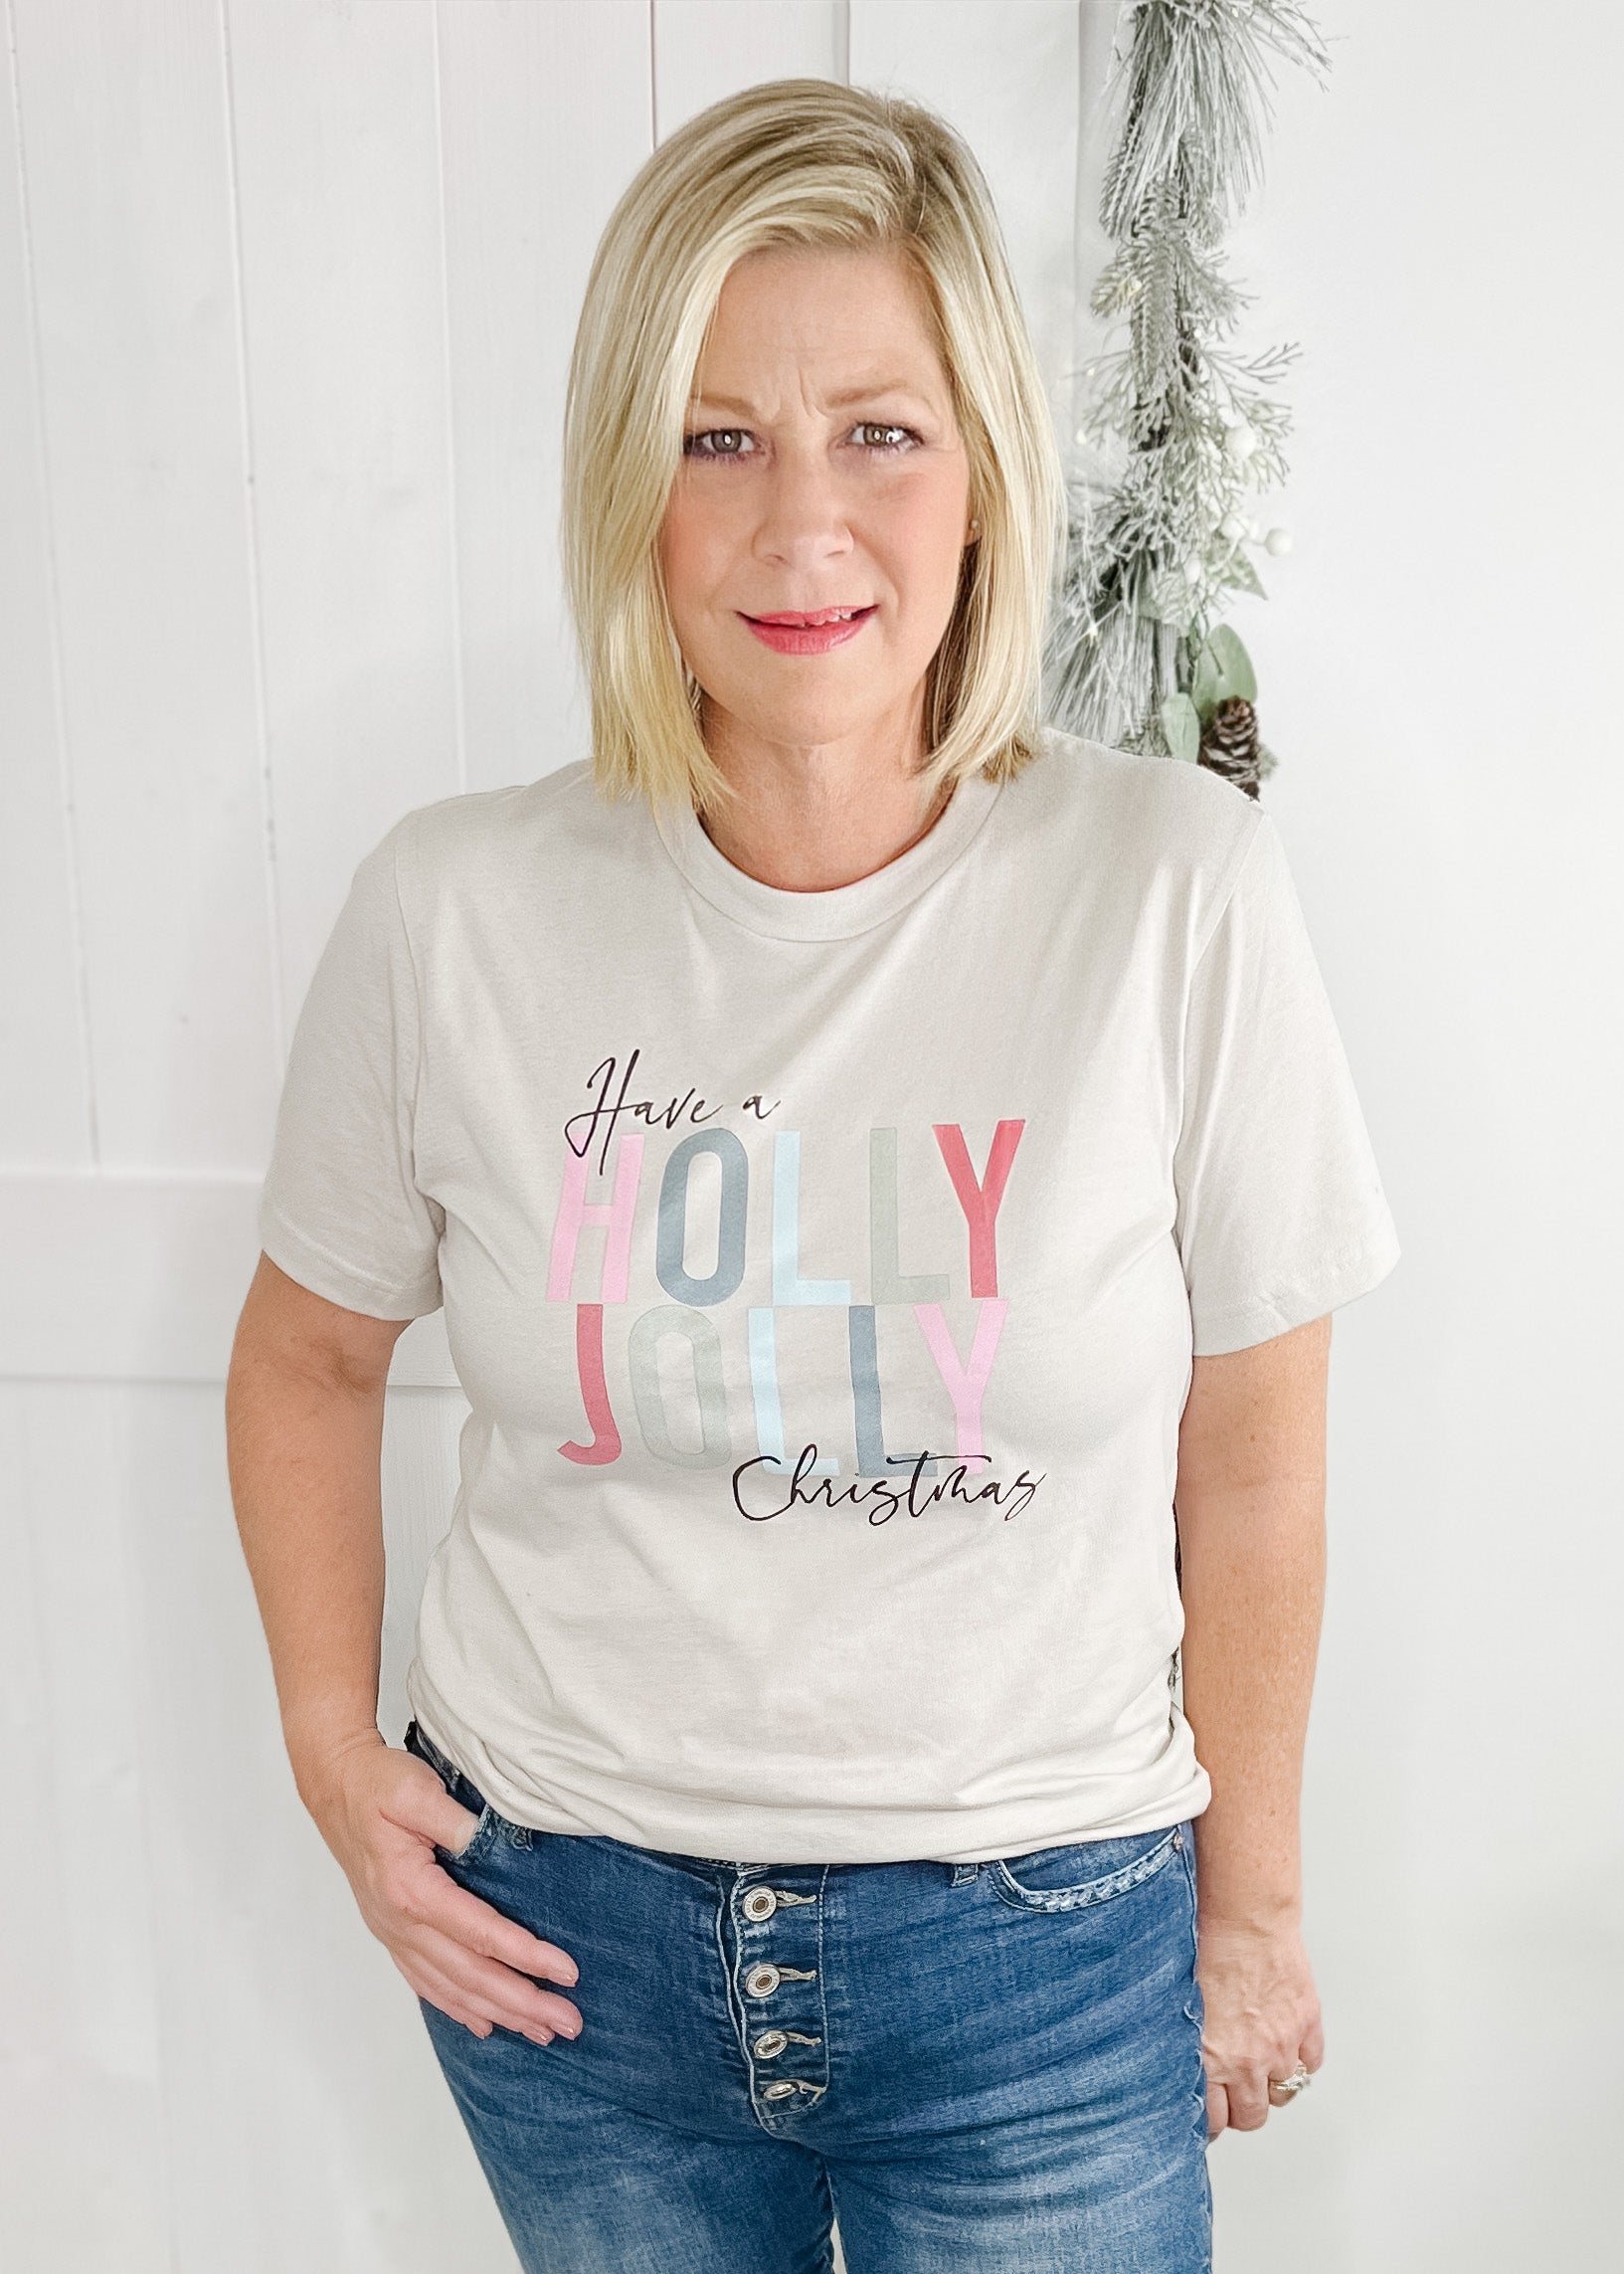 Cream Have a Holly Jolly Christmas tee. holly Jolly in multi pastel colors and have a Christmas is in black. 